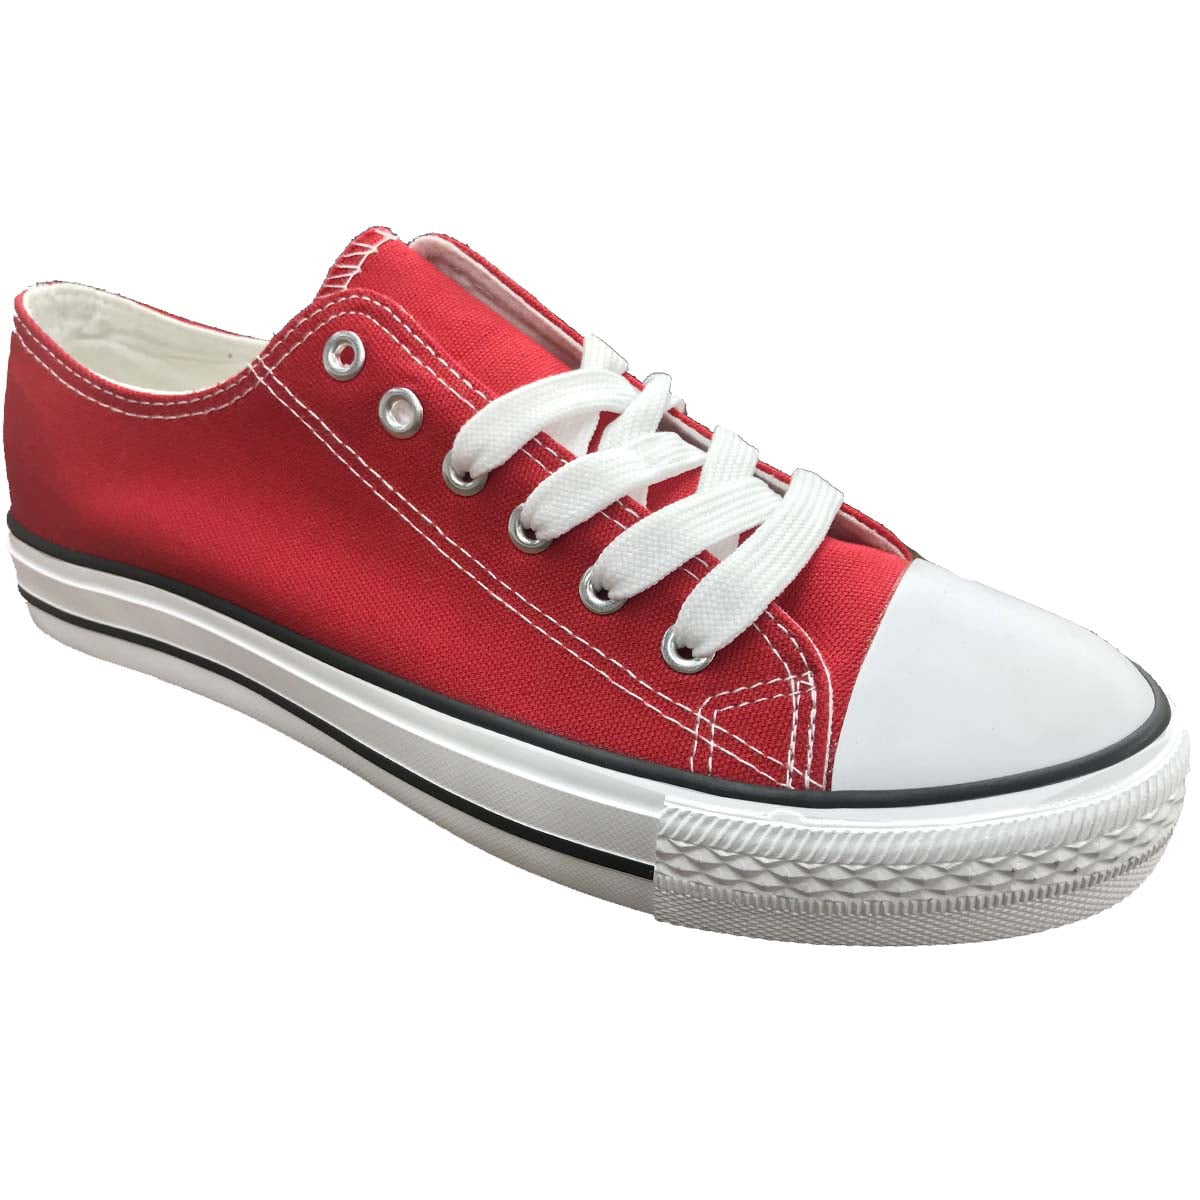 red canvas shoes walmart